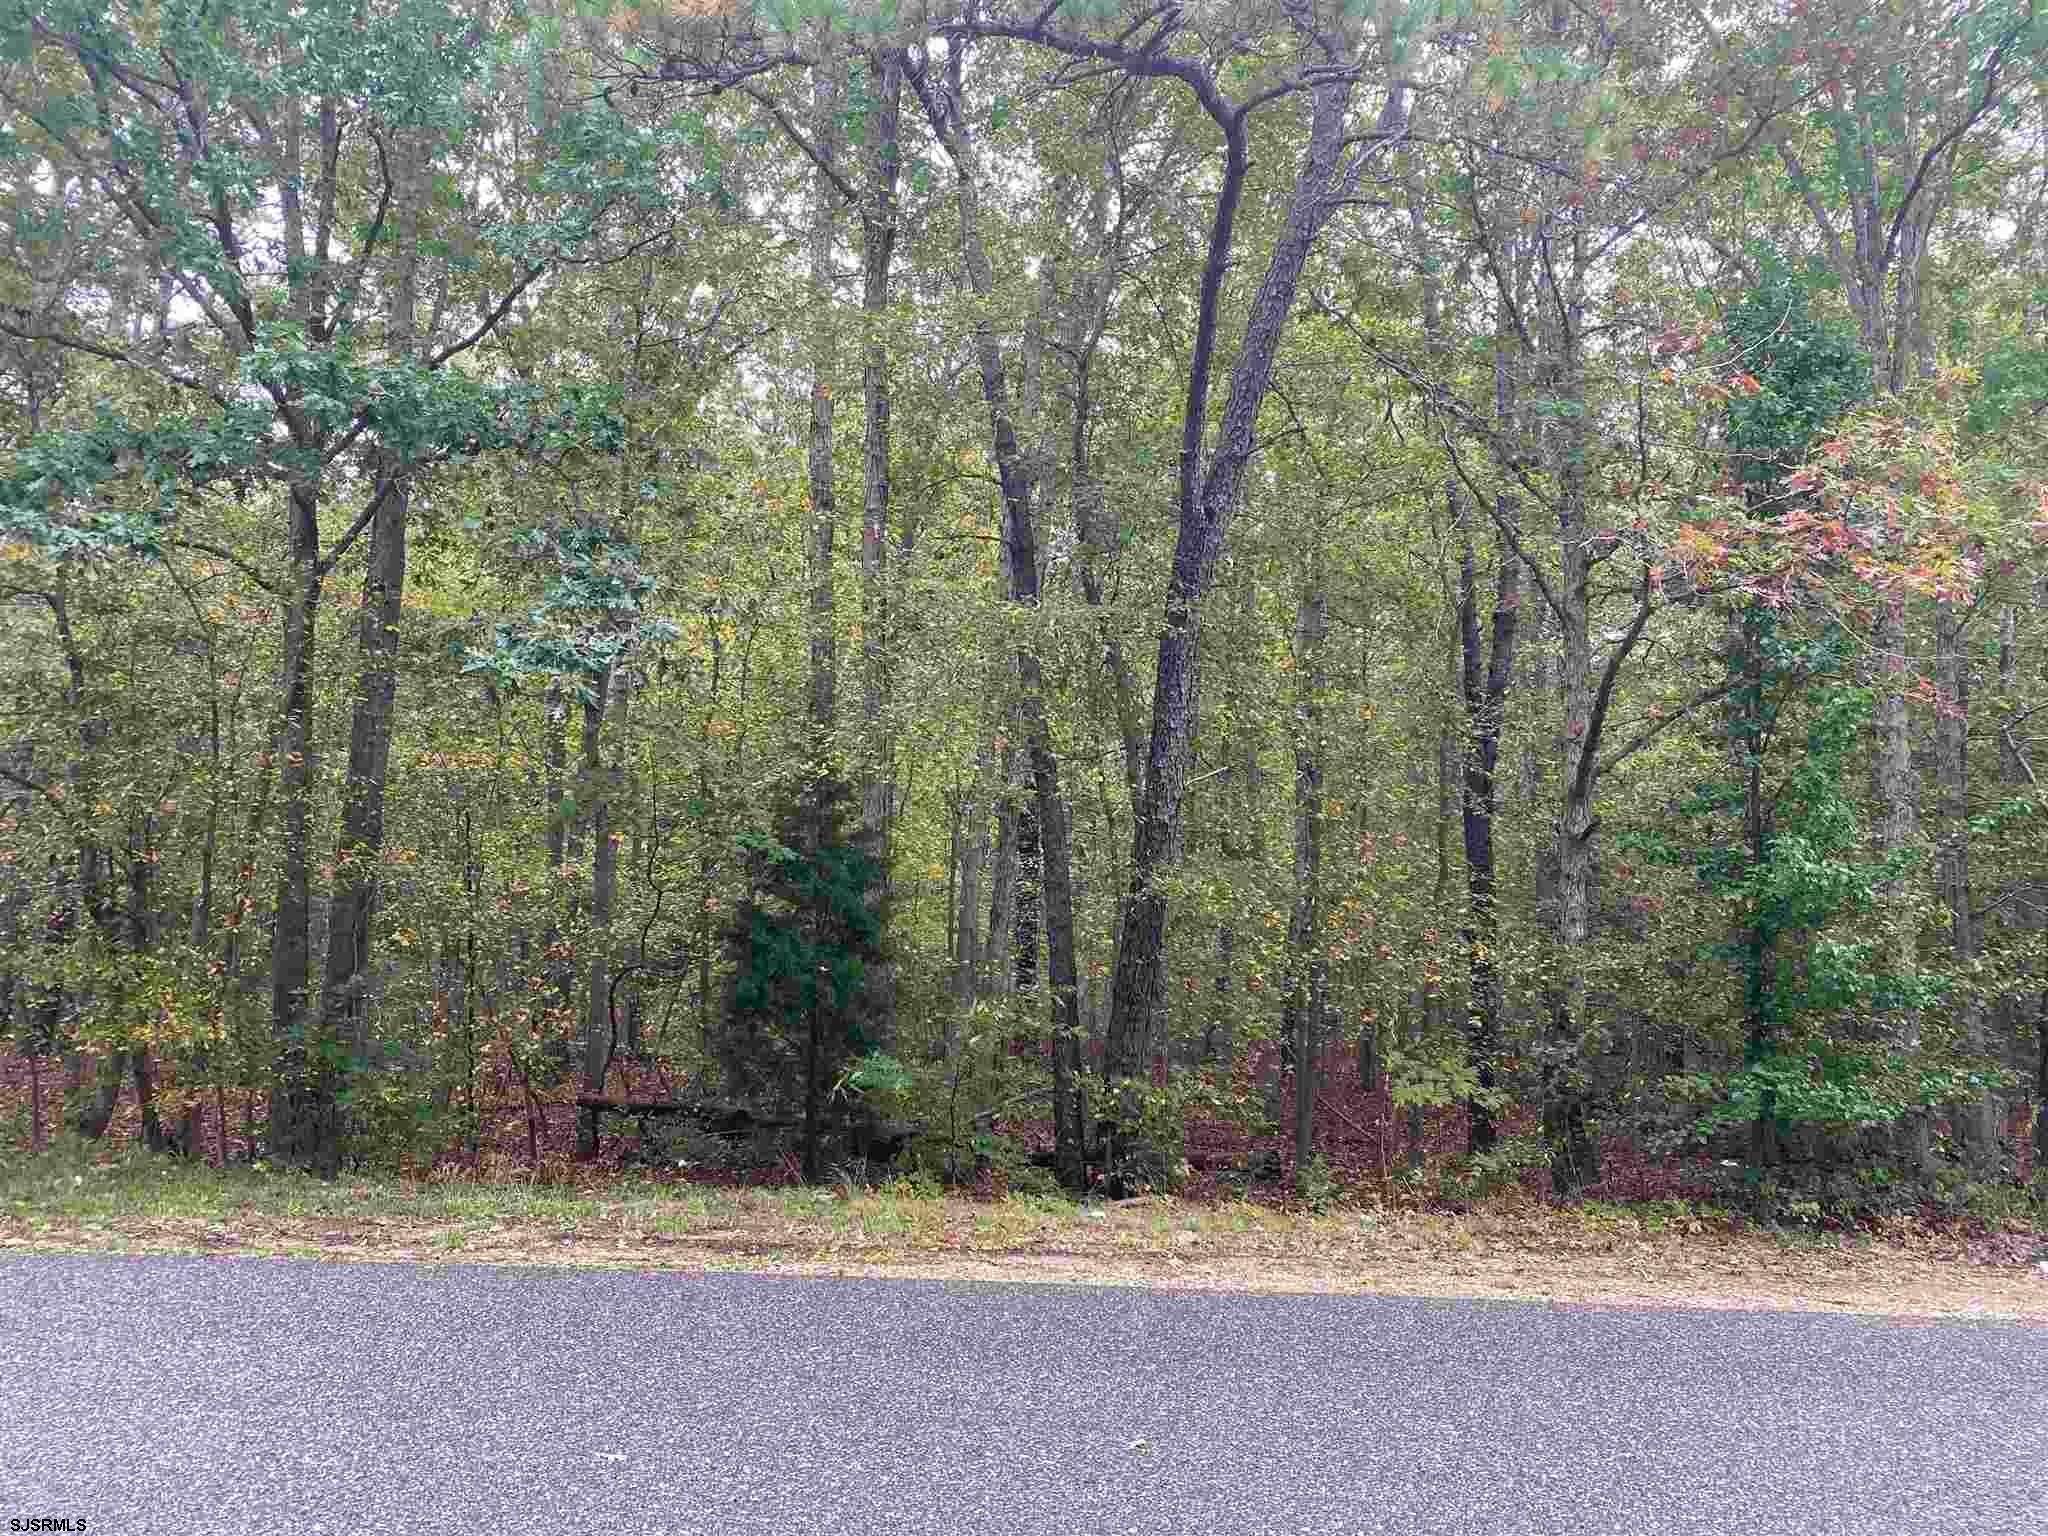 2. Land for Sale at Damson Avenue Galloway Township, New Jersey 08205 United States